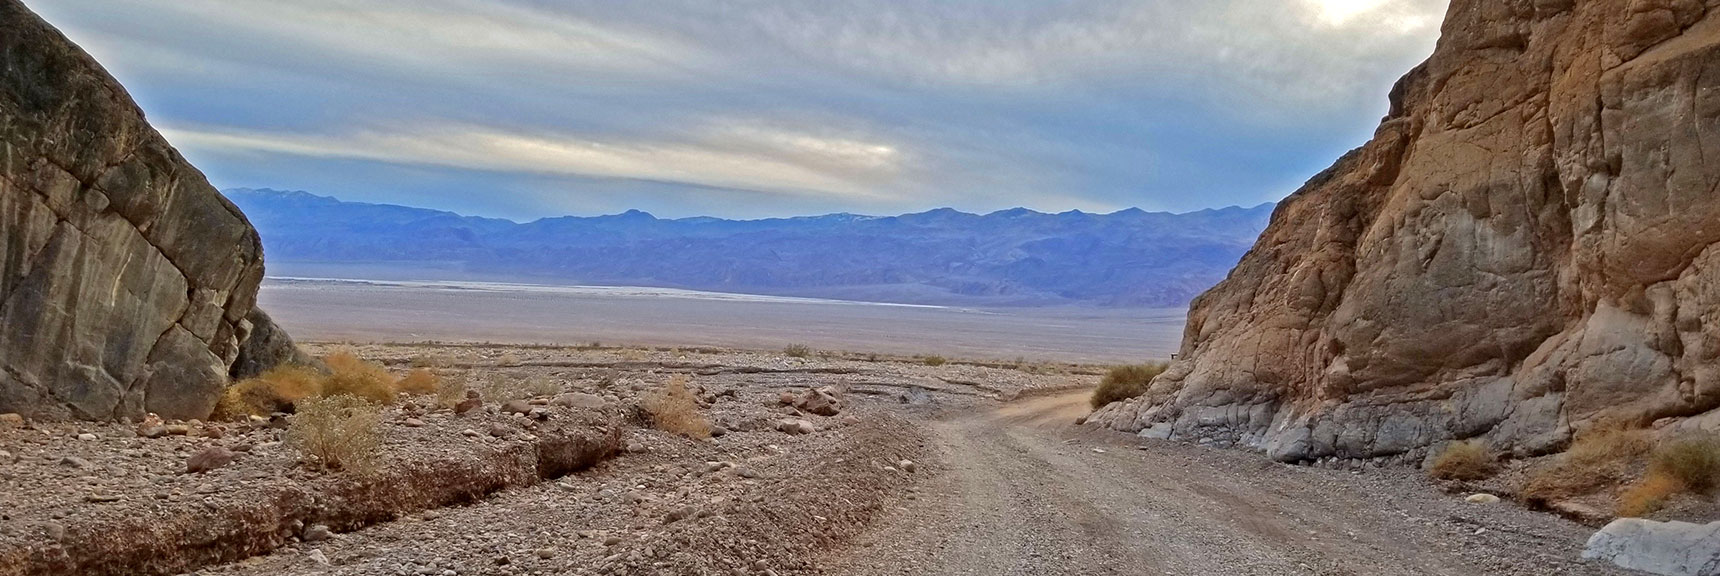 3 Deep Gravel Unpaved Miles to Go, Then 15 Miles on Scotty's Castle Road. | Titus Canyon Grand Loop by Mountain Bike | Death Valley National Park, California